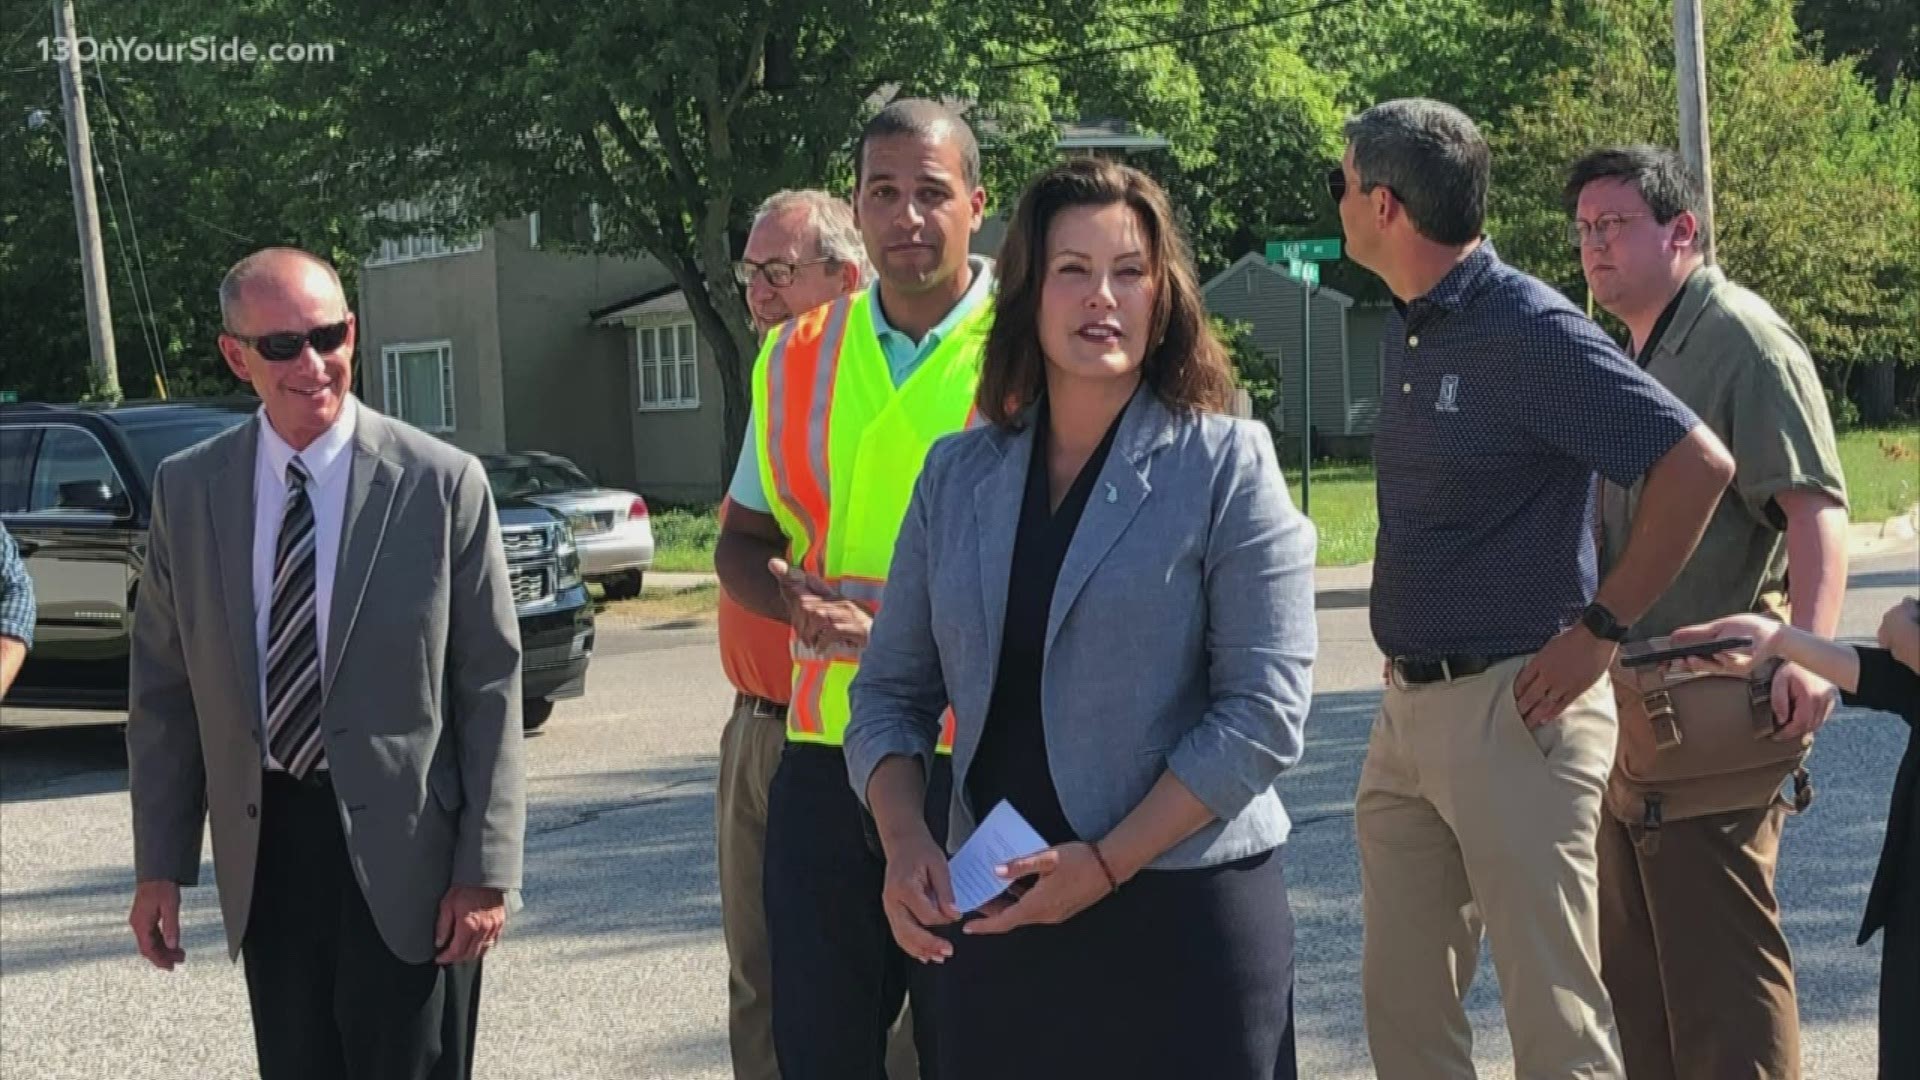 Gov. Gretchen Whitmer made the rounds through West Michigan Wednesday. She stopped at Muskegon, Ferrysburg and Ionia for various events and meetings.